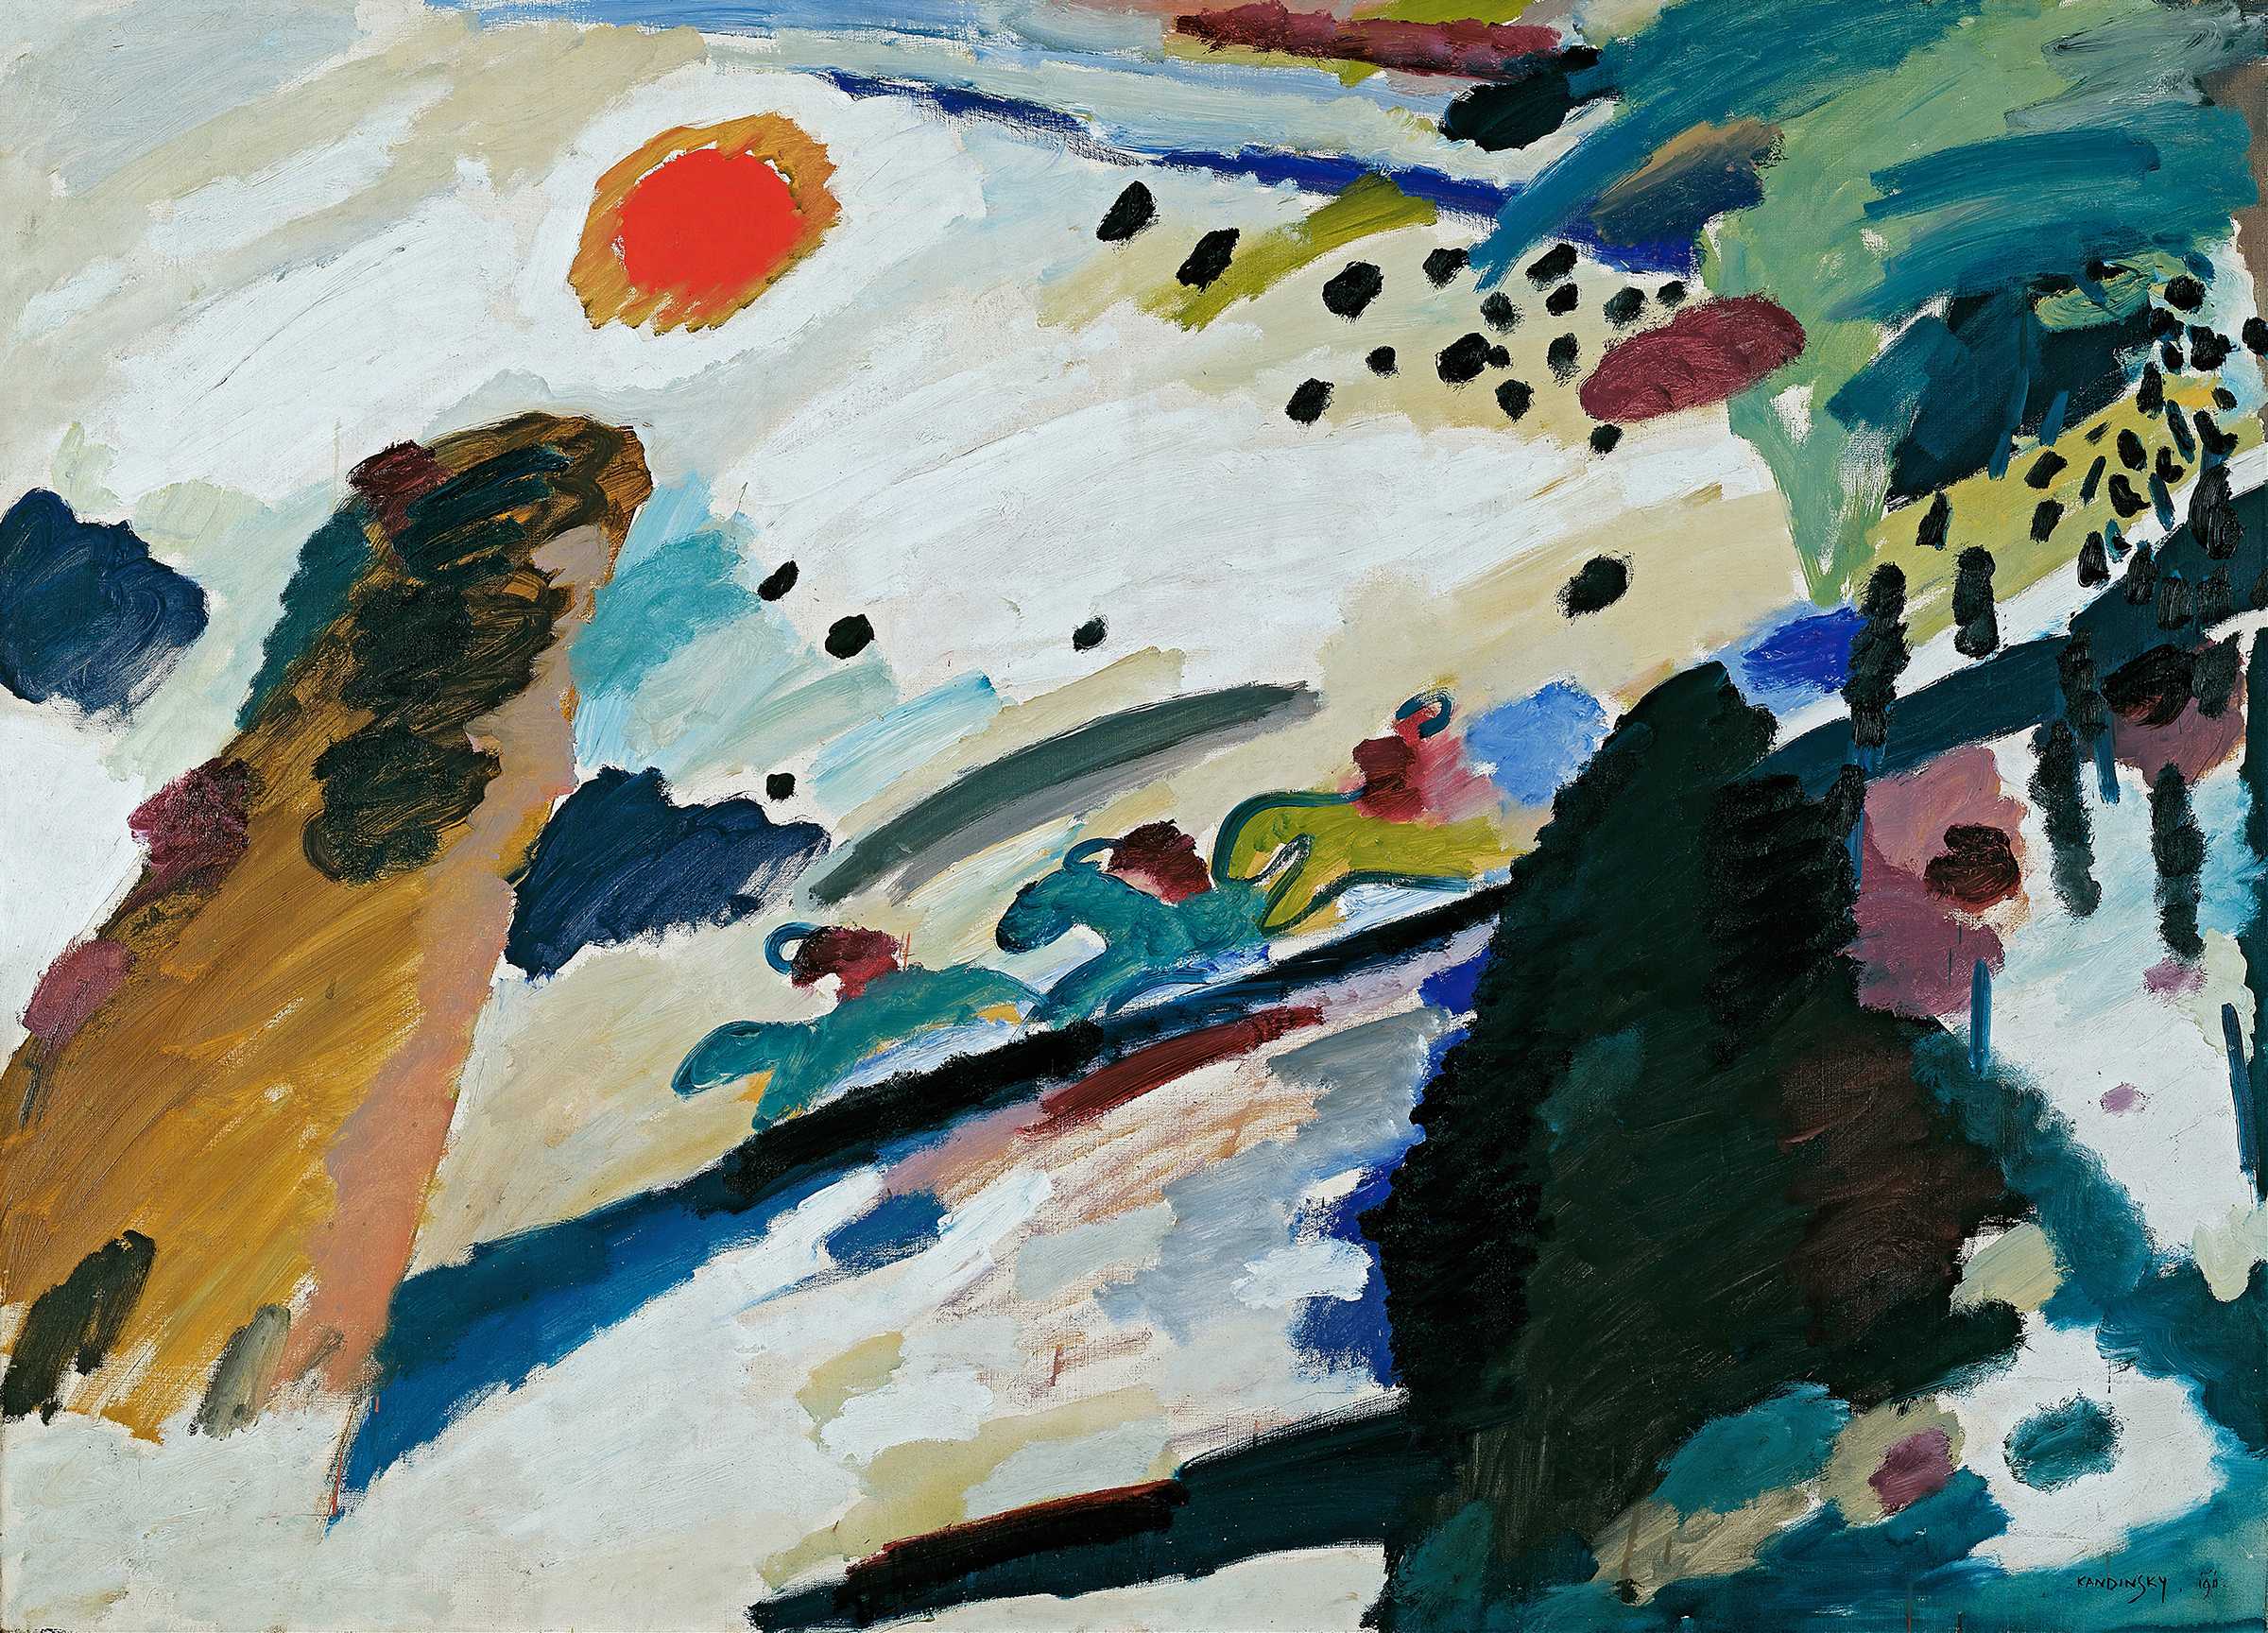 Find out more about Wassily Kandinsky - Romantic Landscape